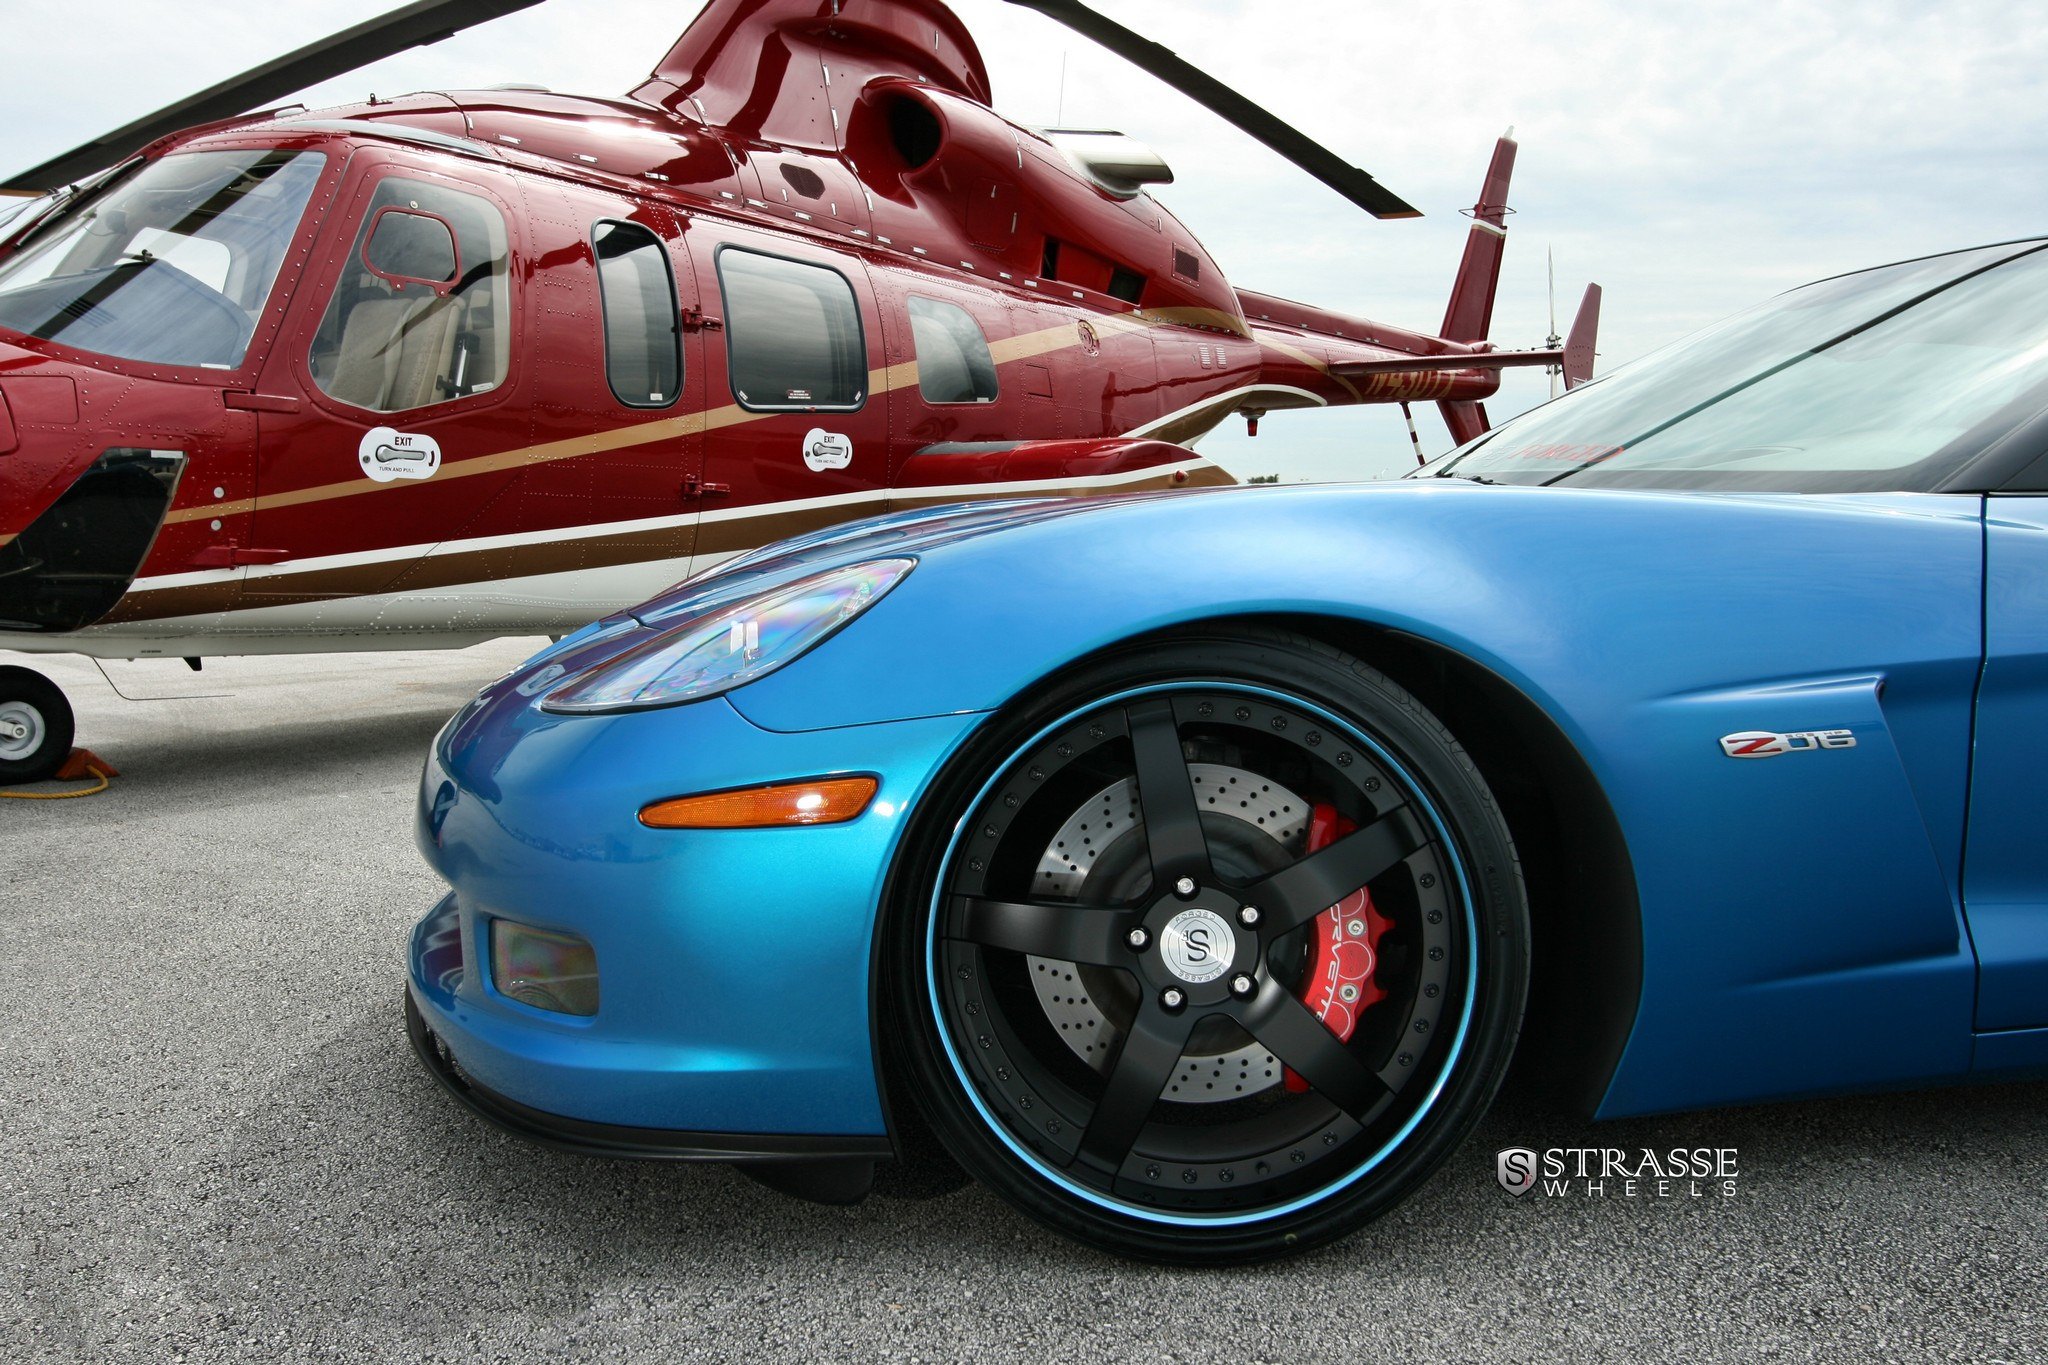 Blue Chevy Corvette with Matte Black Strasse Rims - Photo by Strasse Forged